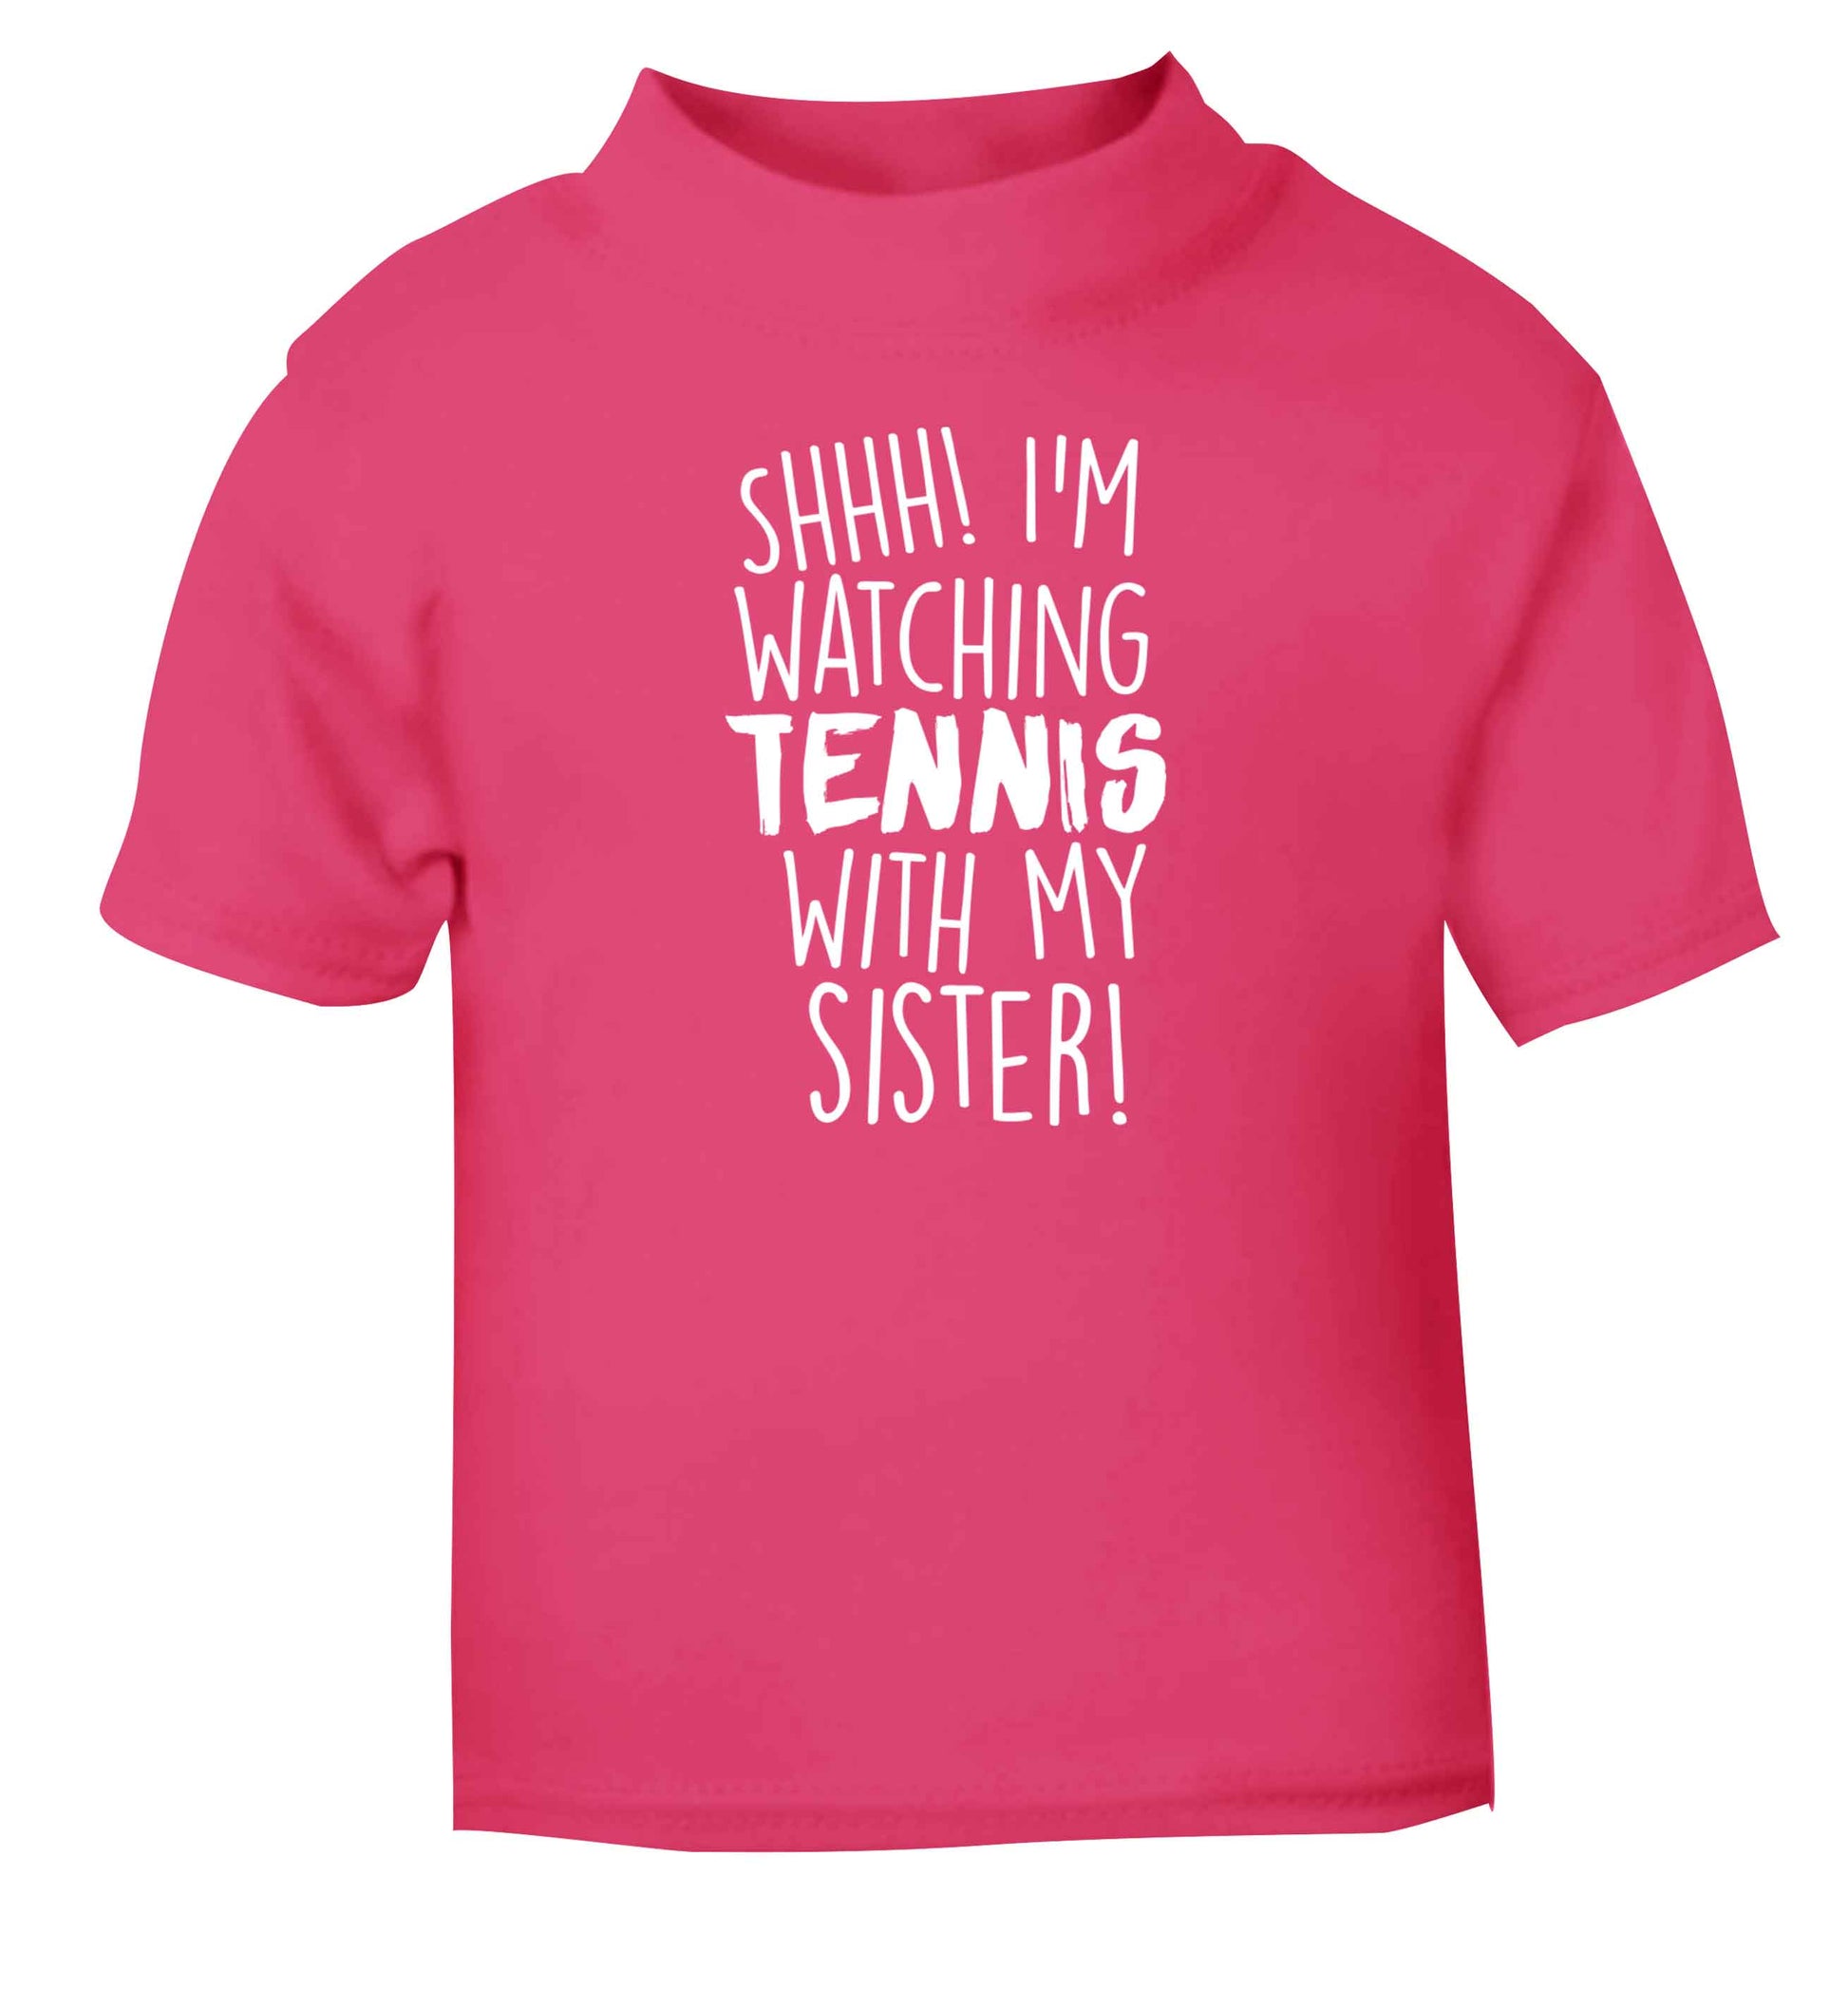 Shh! I'm watching tennis with my sister! pink Baby Toddler Tshirt 2 Years